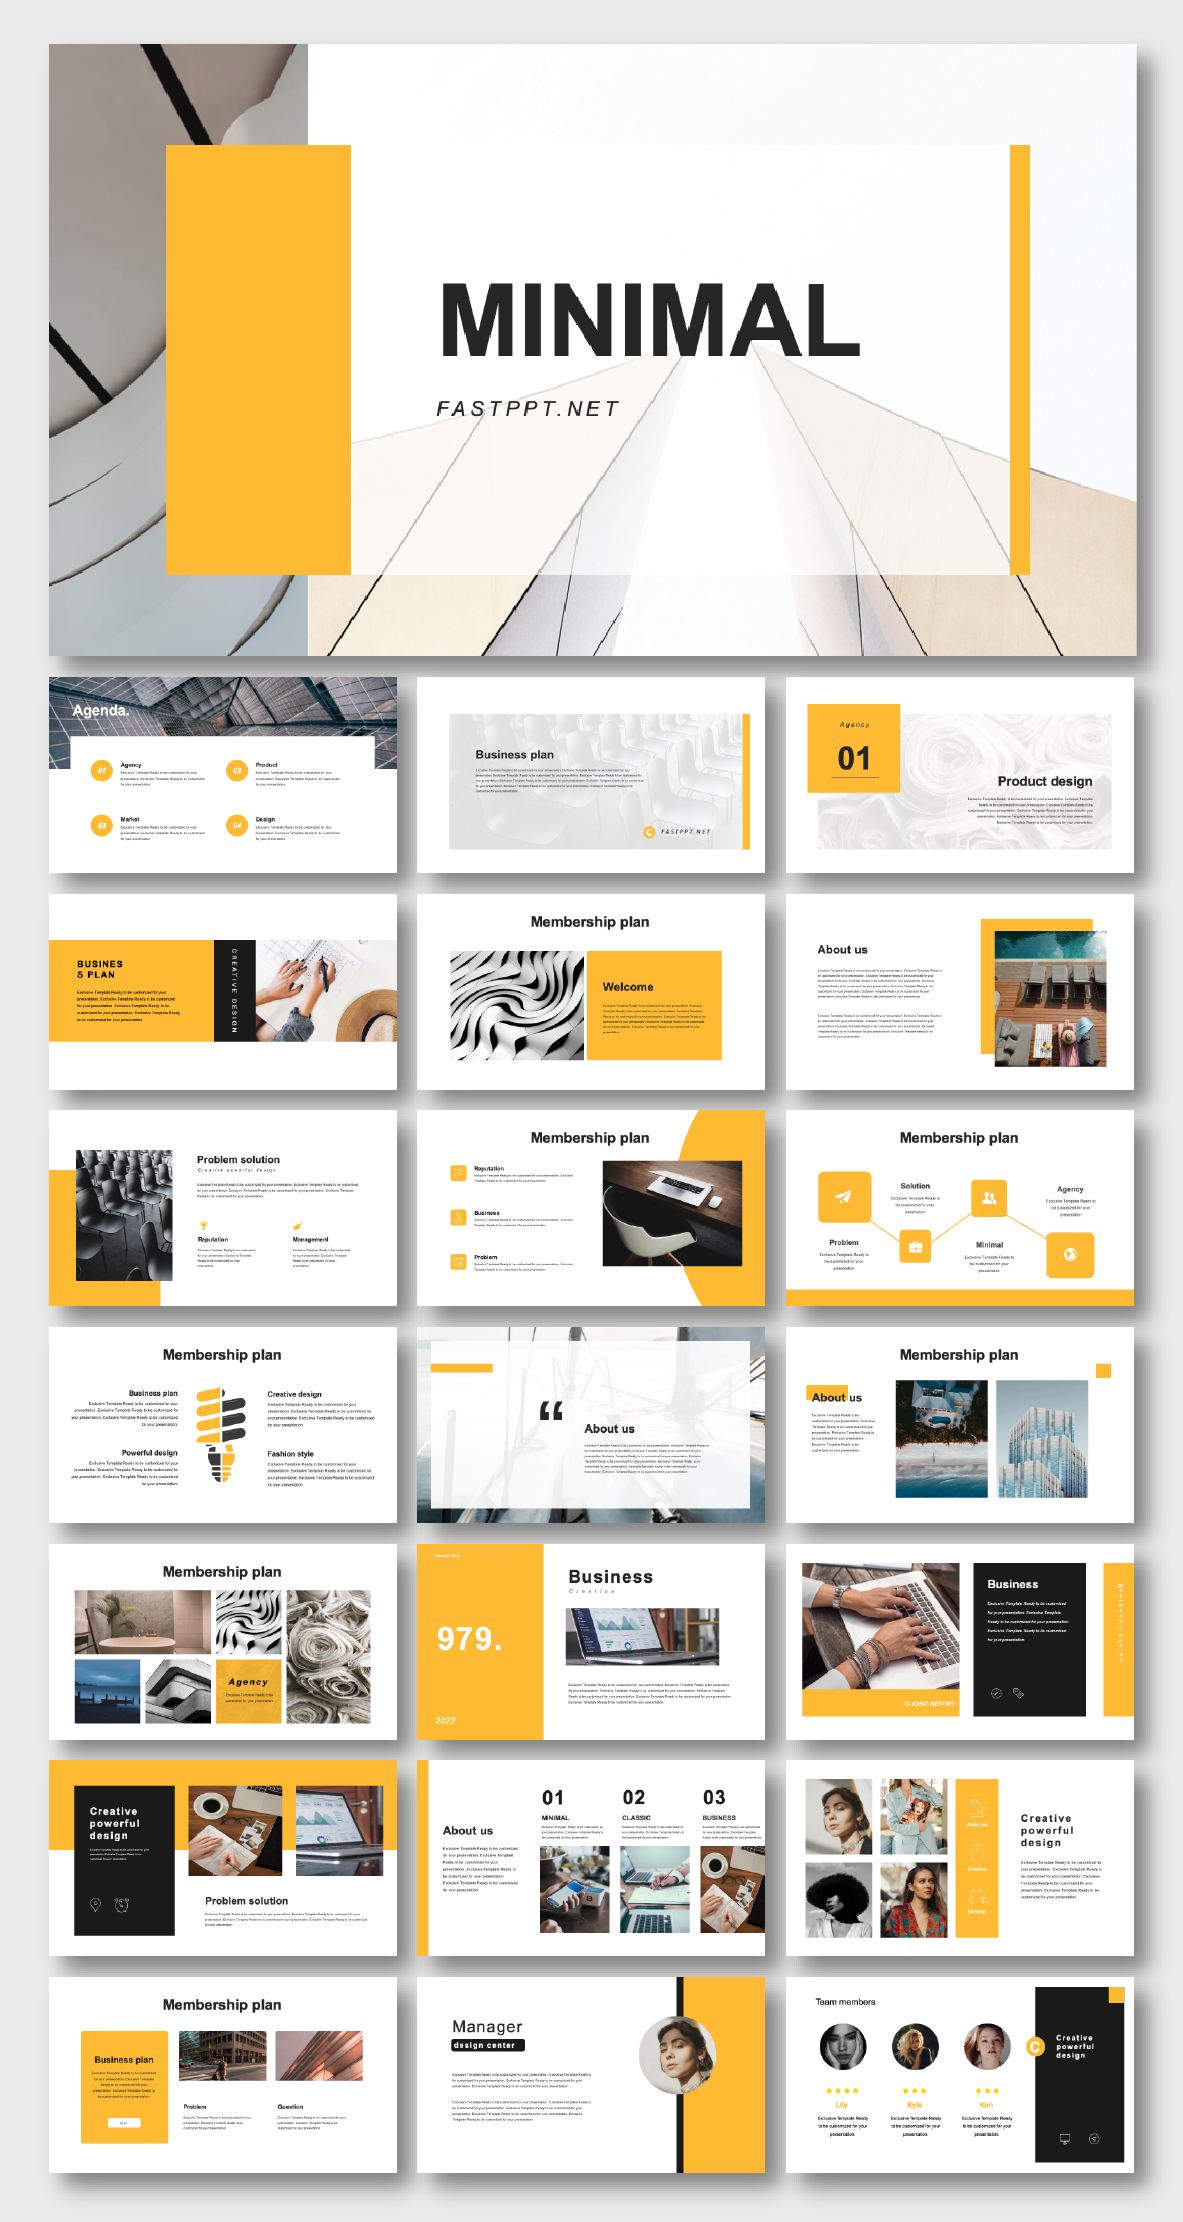 Clean Business Introduction Powerpoint Template Original And High Quality Powerpoint Templates Powerpoint Presentation Design Presentation Design Layout Portfolio Design Layout